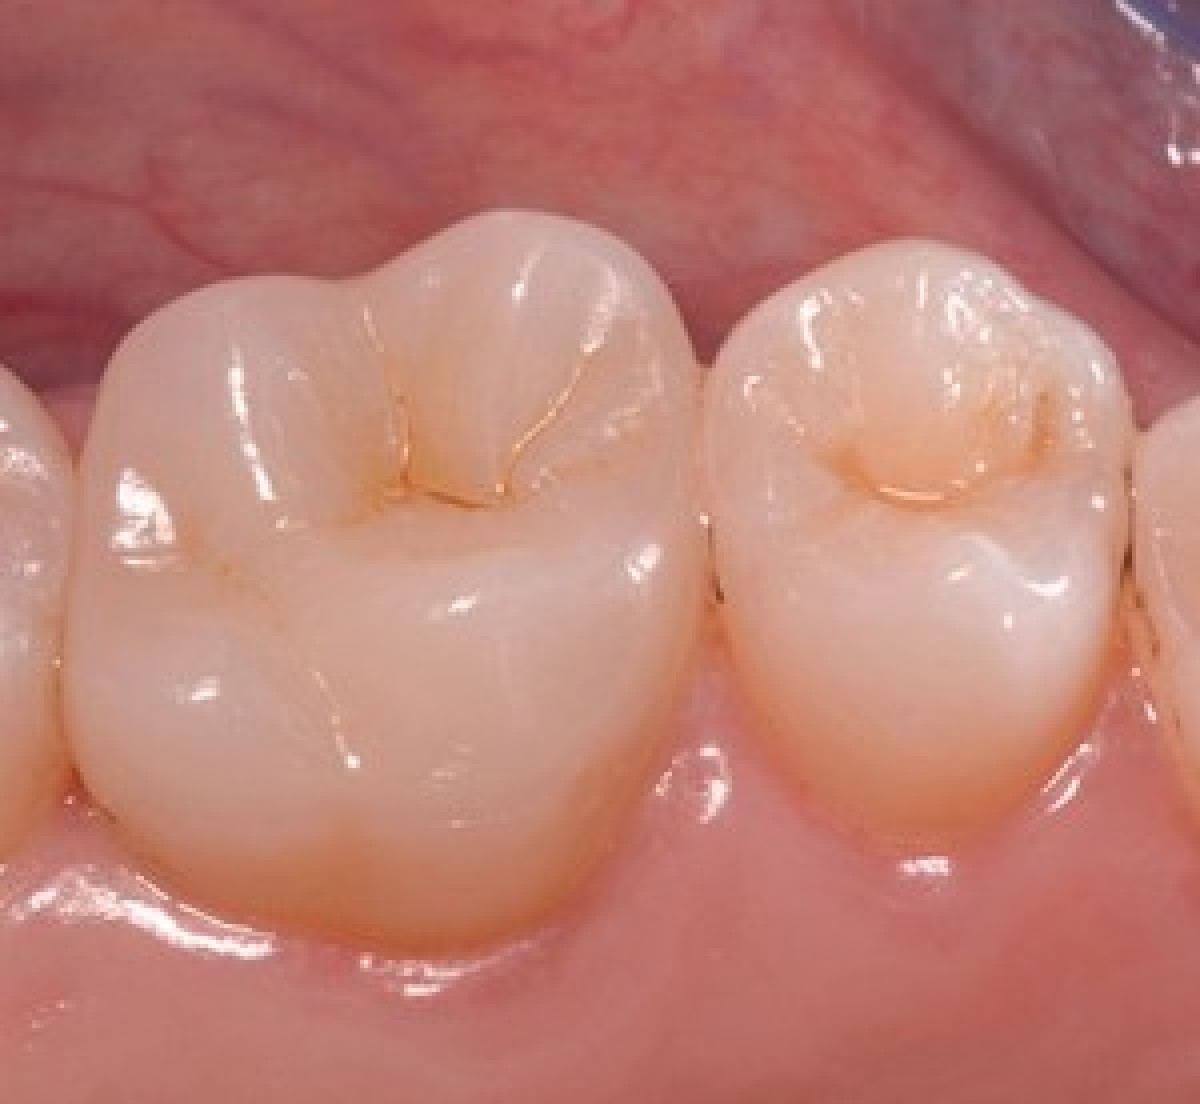 Cementation of zirconia crowns: effectiveness of self-adhesive dual